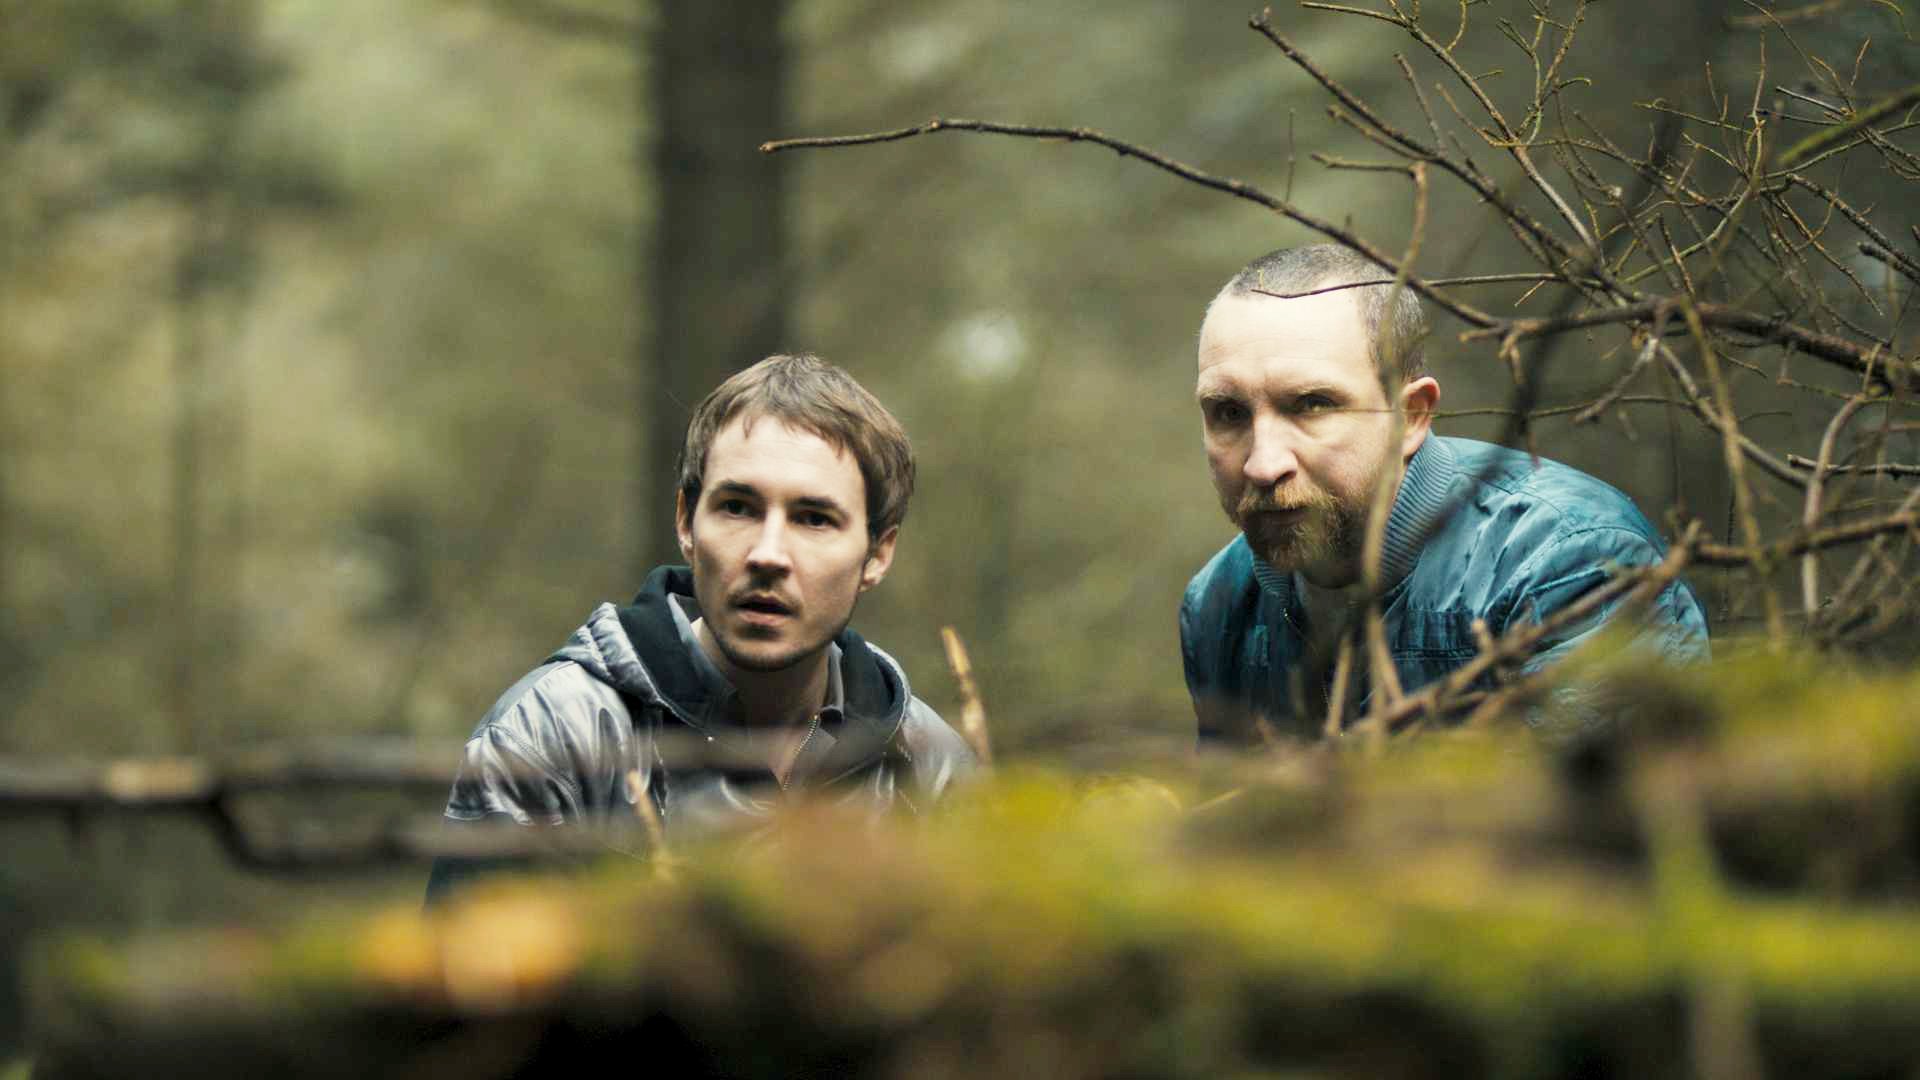 Martin Compston stars as Danny and Eddie Marsan stars as Vic in Anchor Bay Films' The Disappearance of Alice Creed (2010)